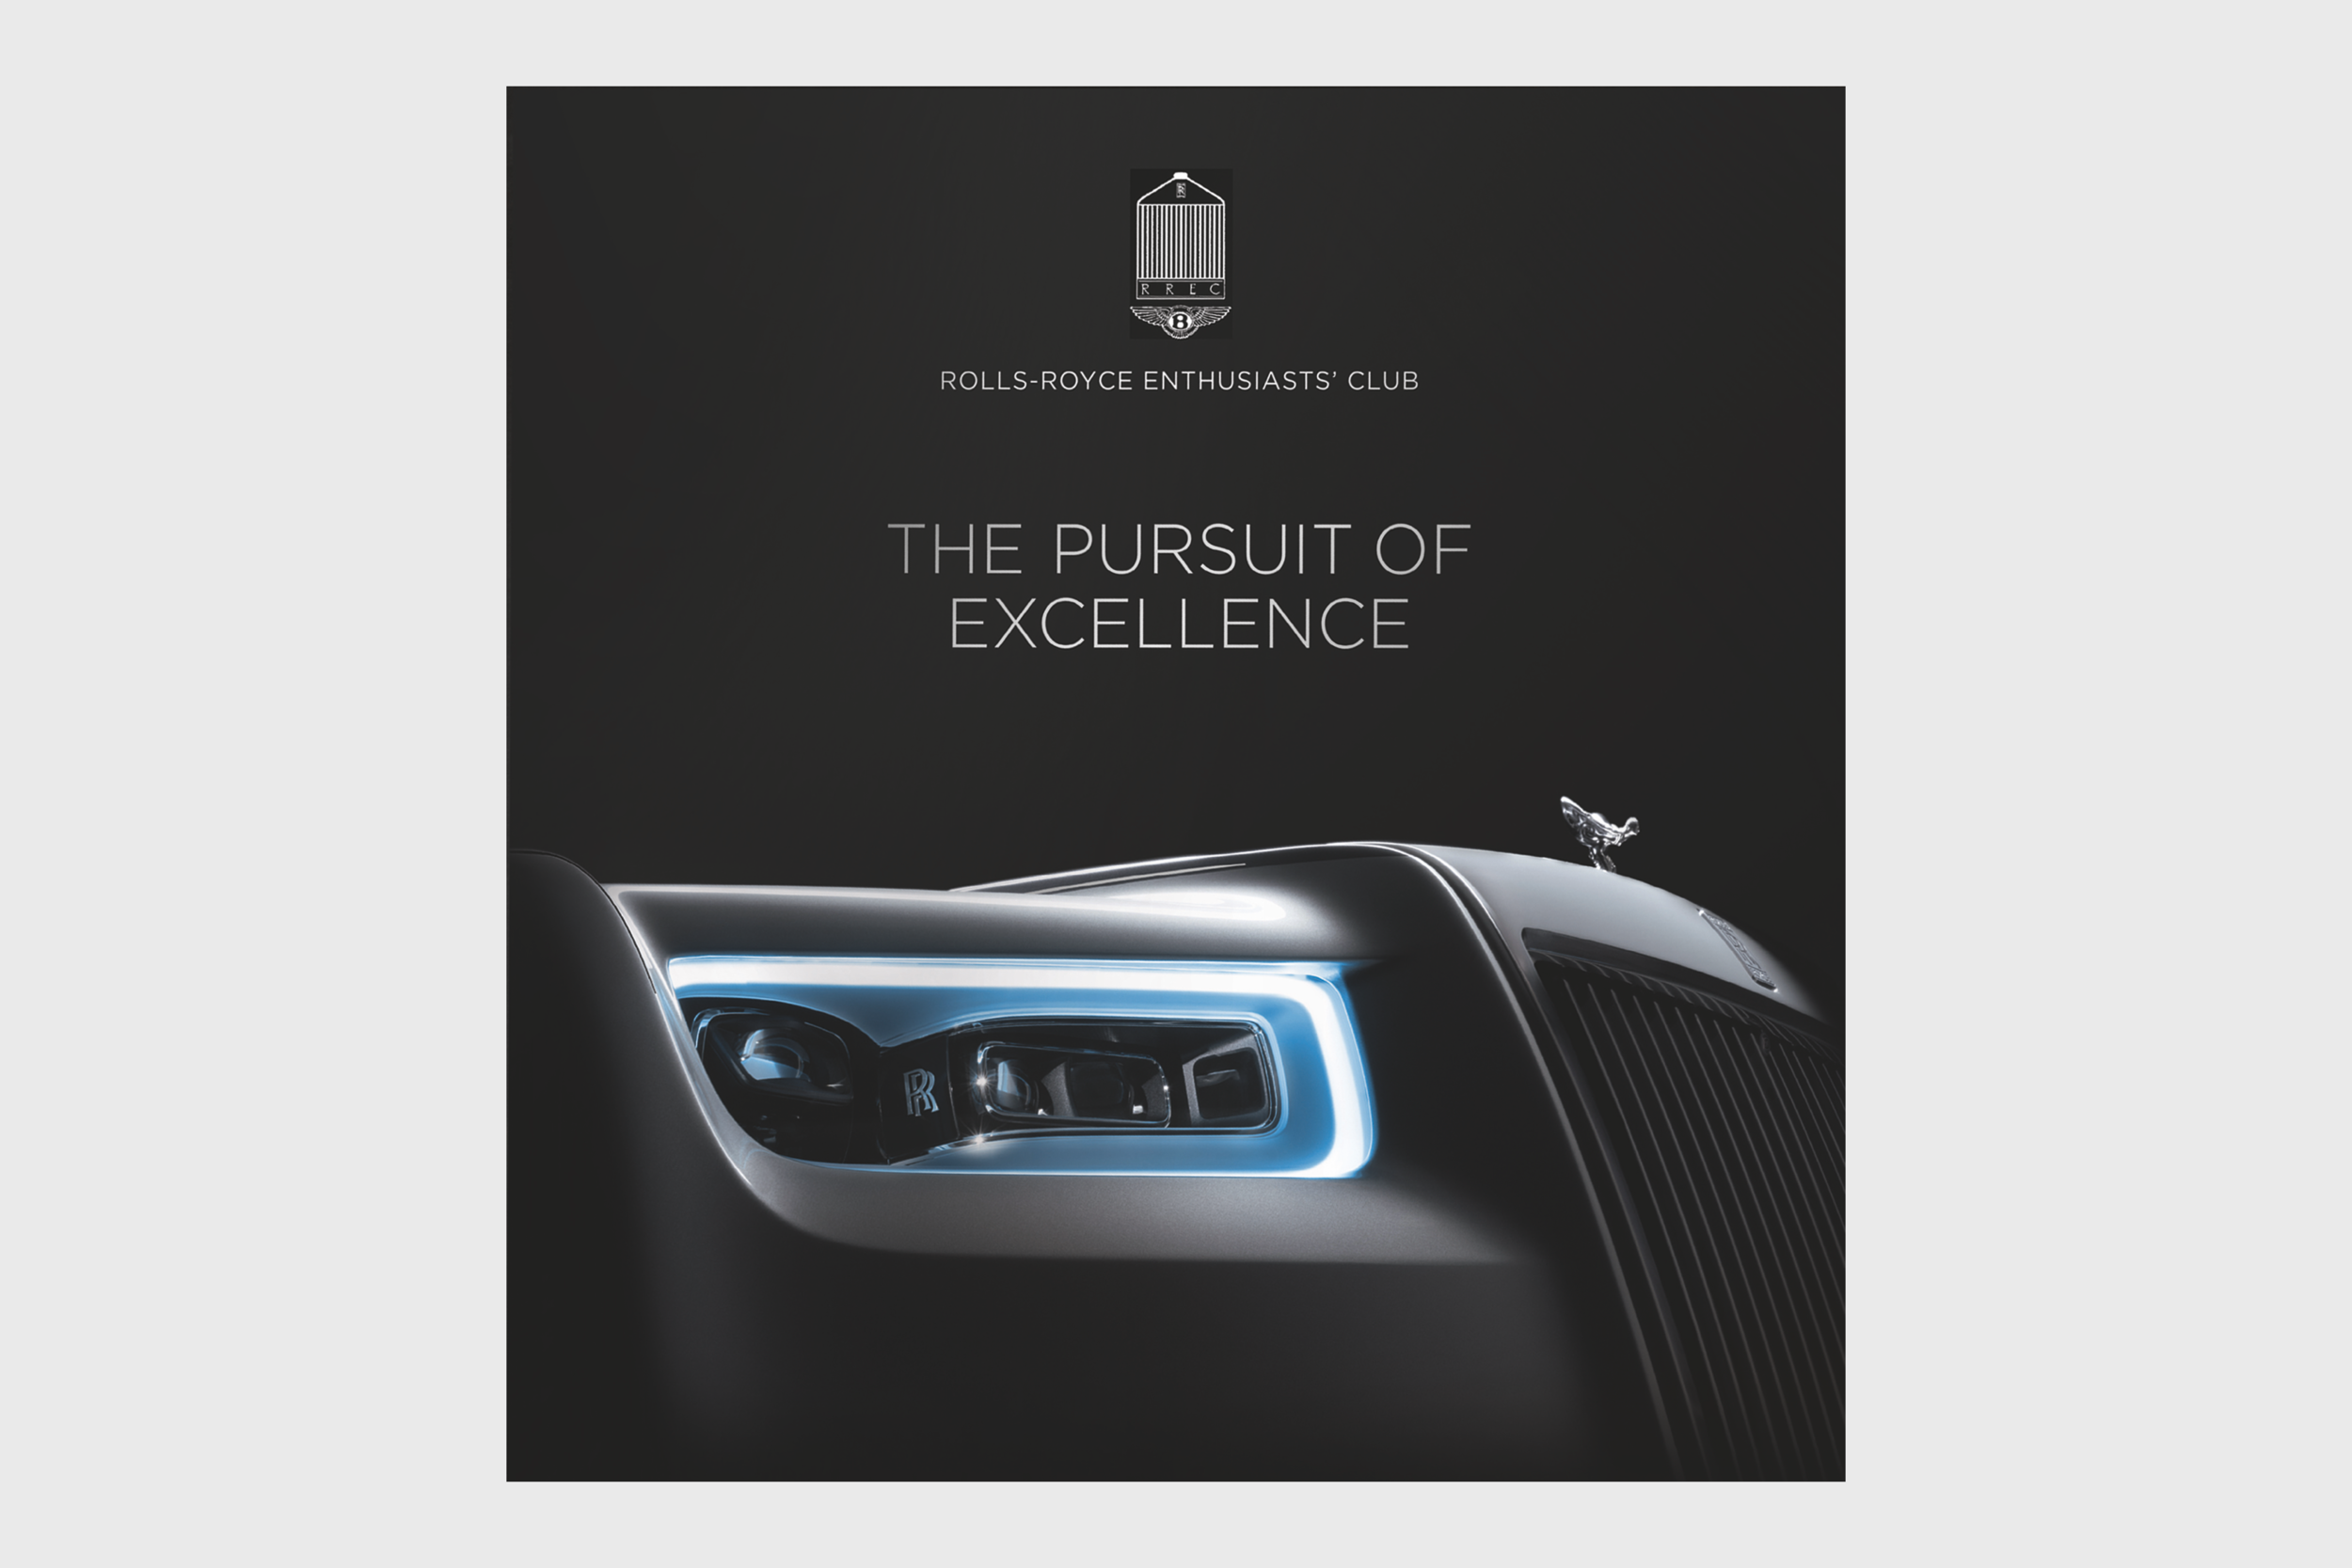 knof_press_rolls-royce_the-pursuit-of-excellence_01.png